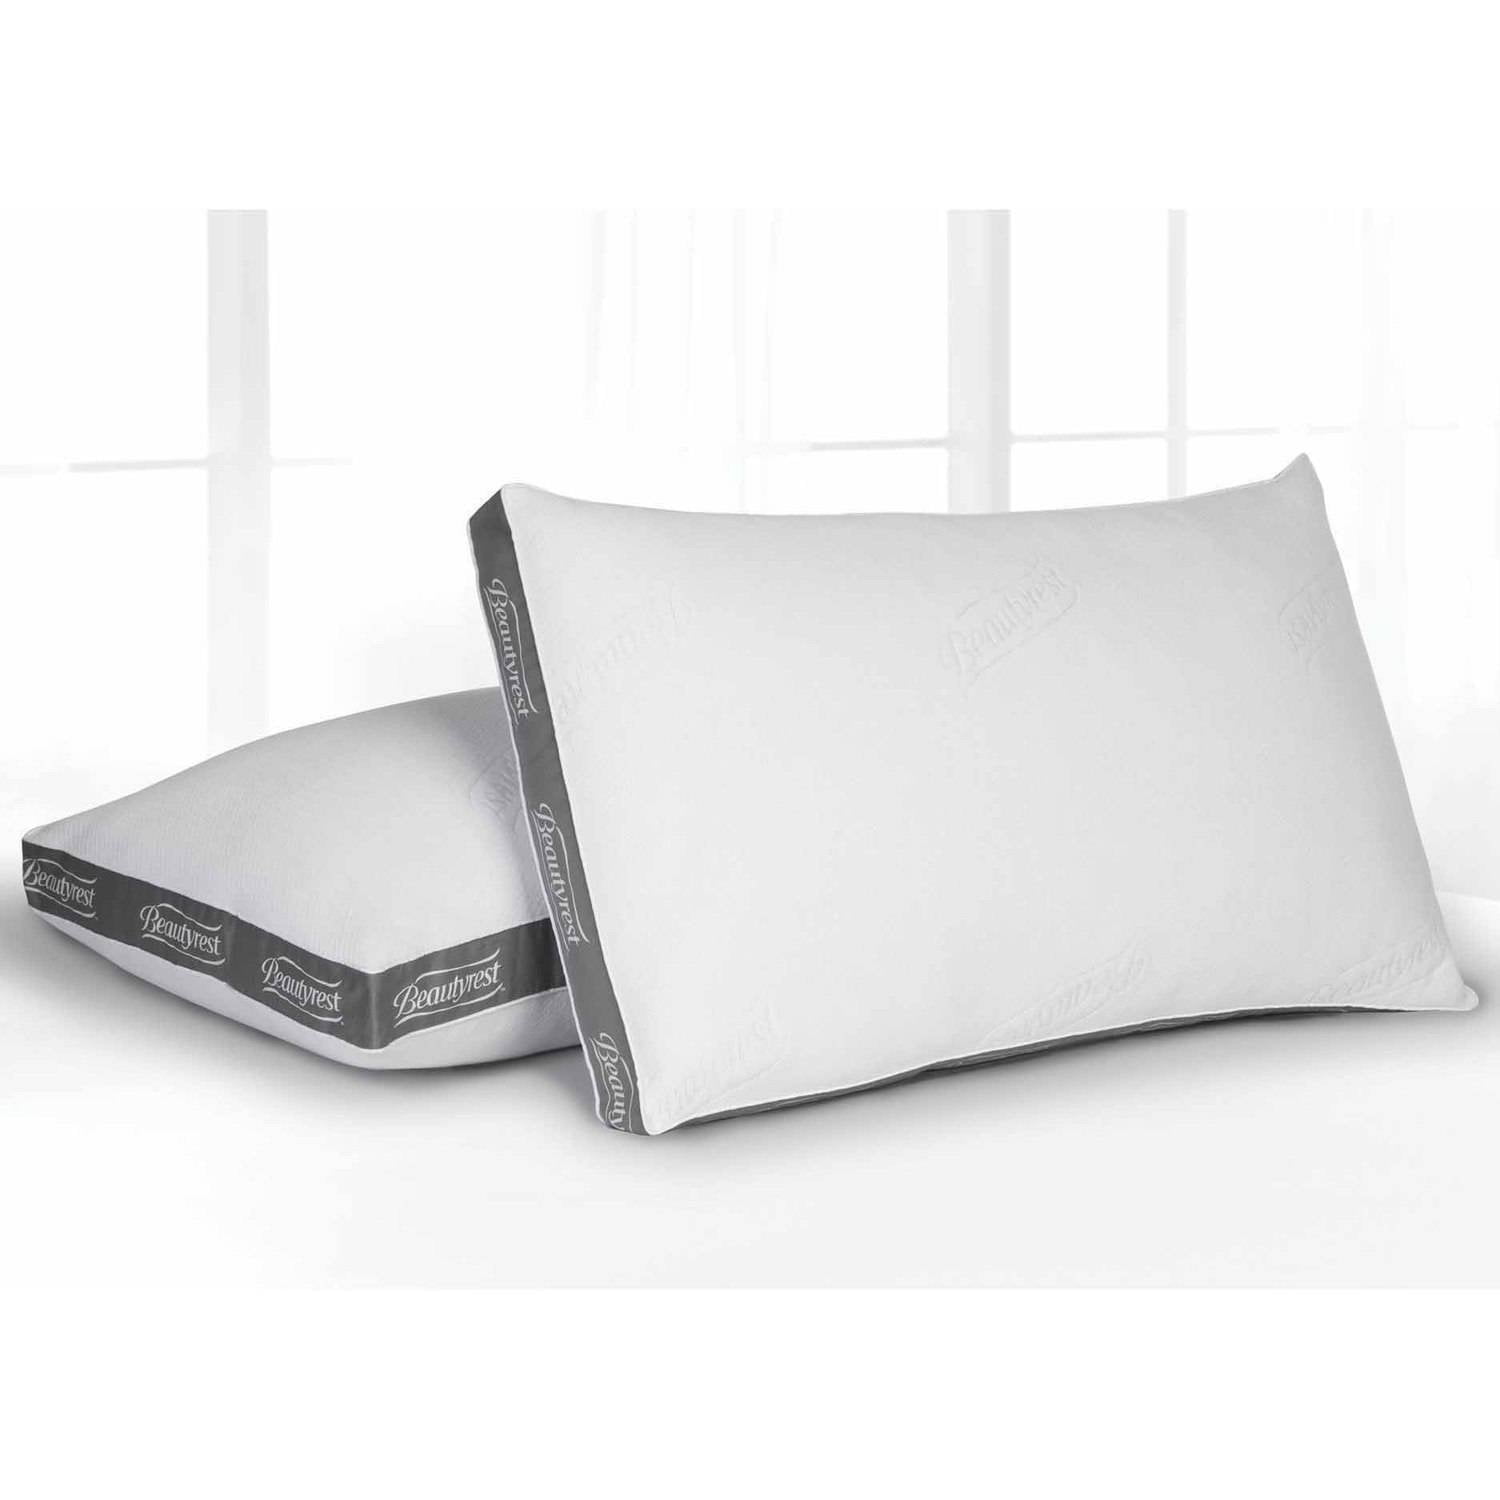 Details about   Hotel Collection Pillows Luxurious Spa Comfort Pillow Set Of 2 Queen Sizes 